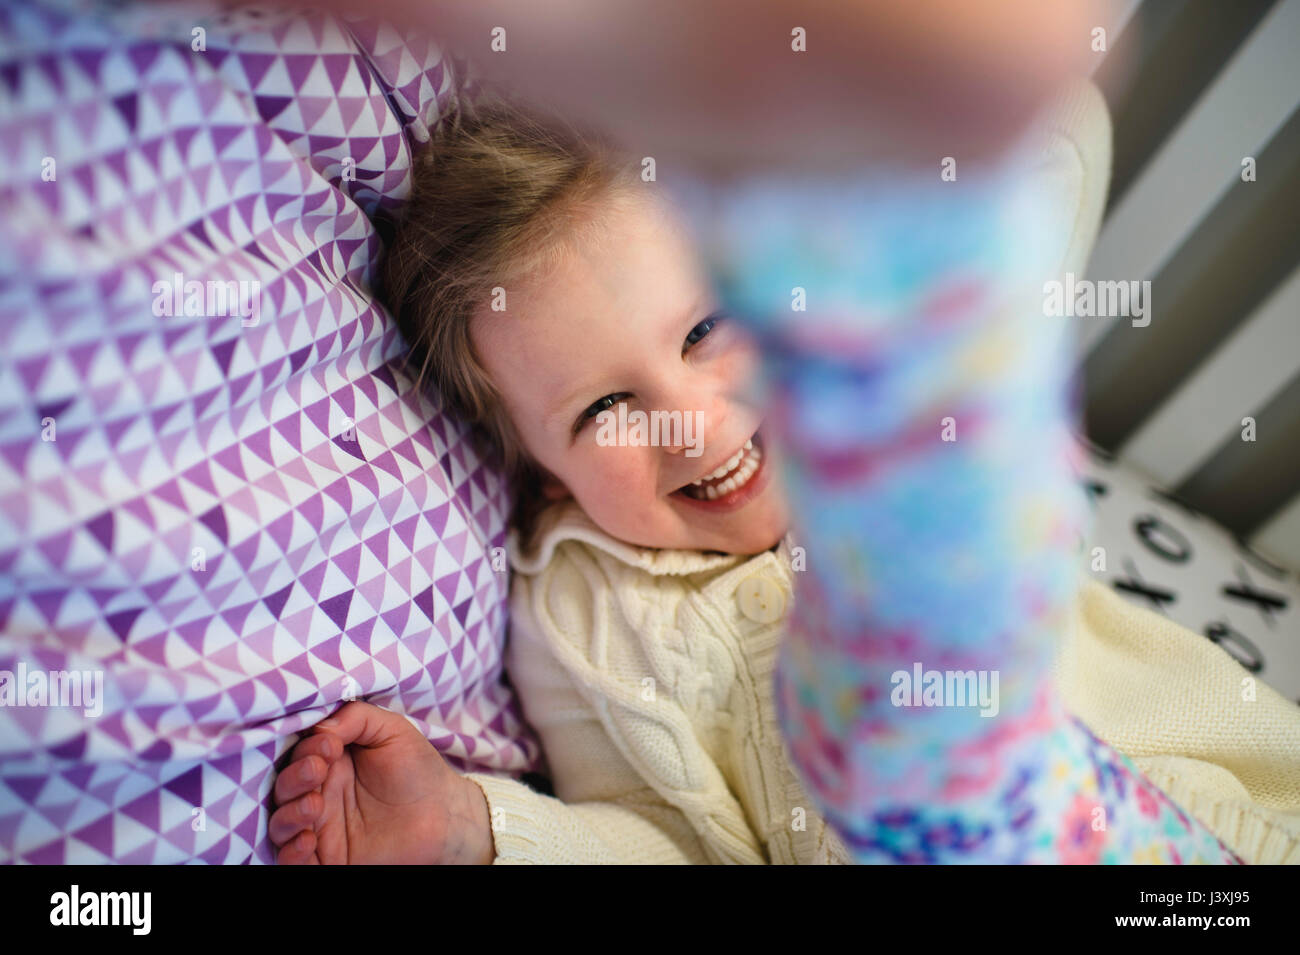 Girl laughing while playing on day bed Stock Photo